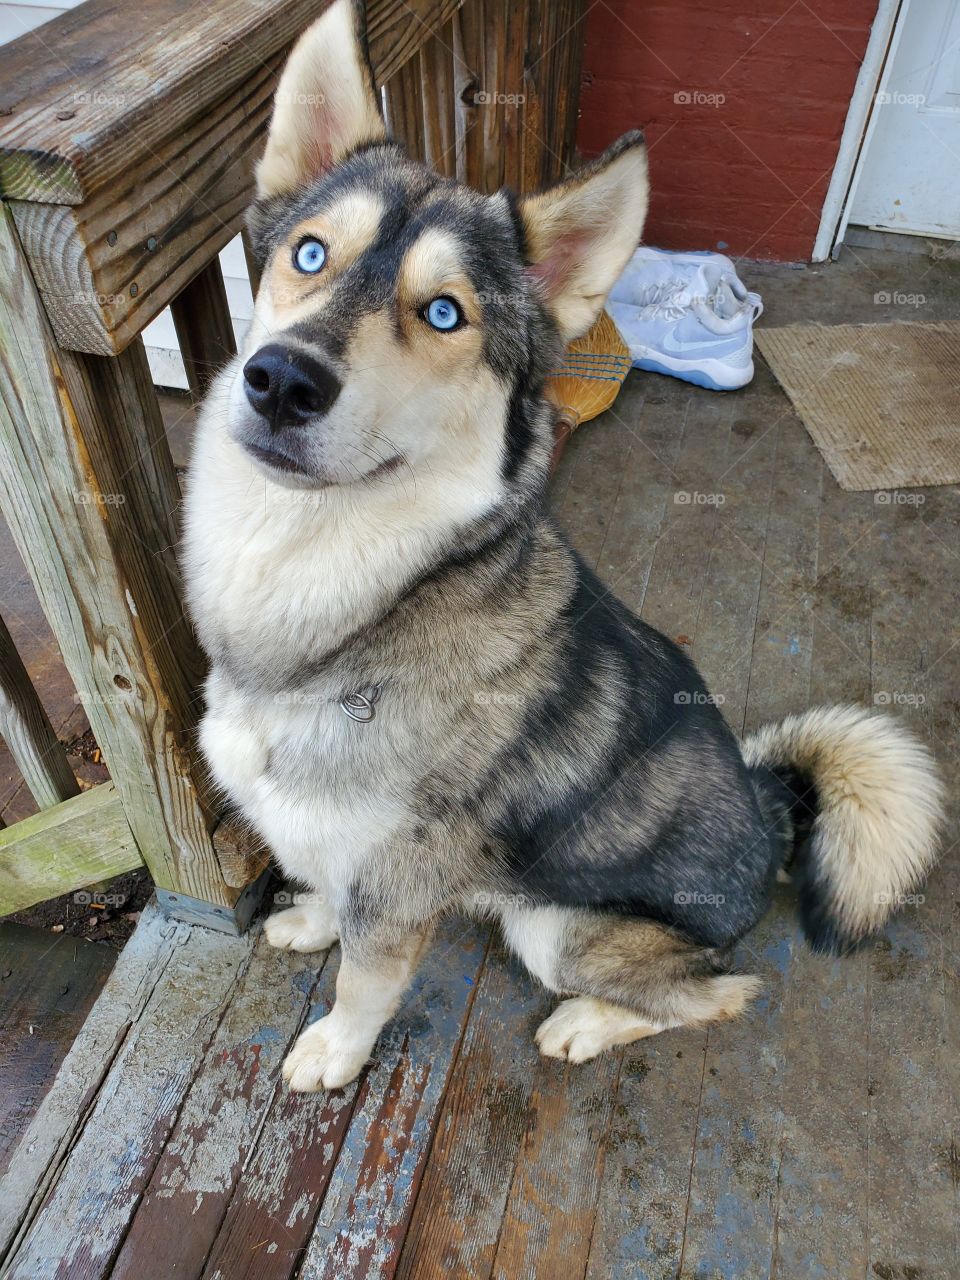 Kujo Bossin'
AKC Registered Siberian Husky
Out on the back porch on a muddy day
Insta: howling_winds_siberians